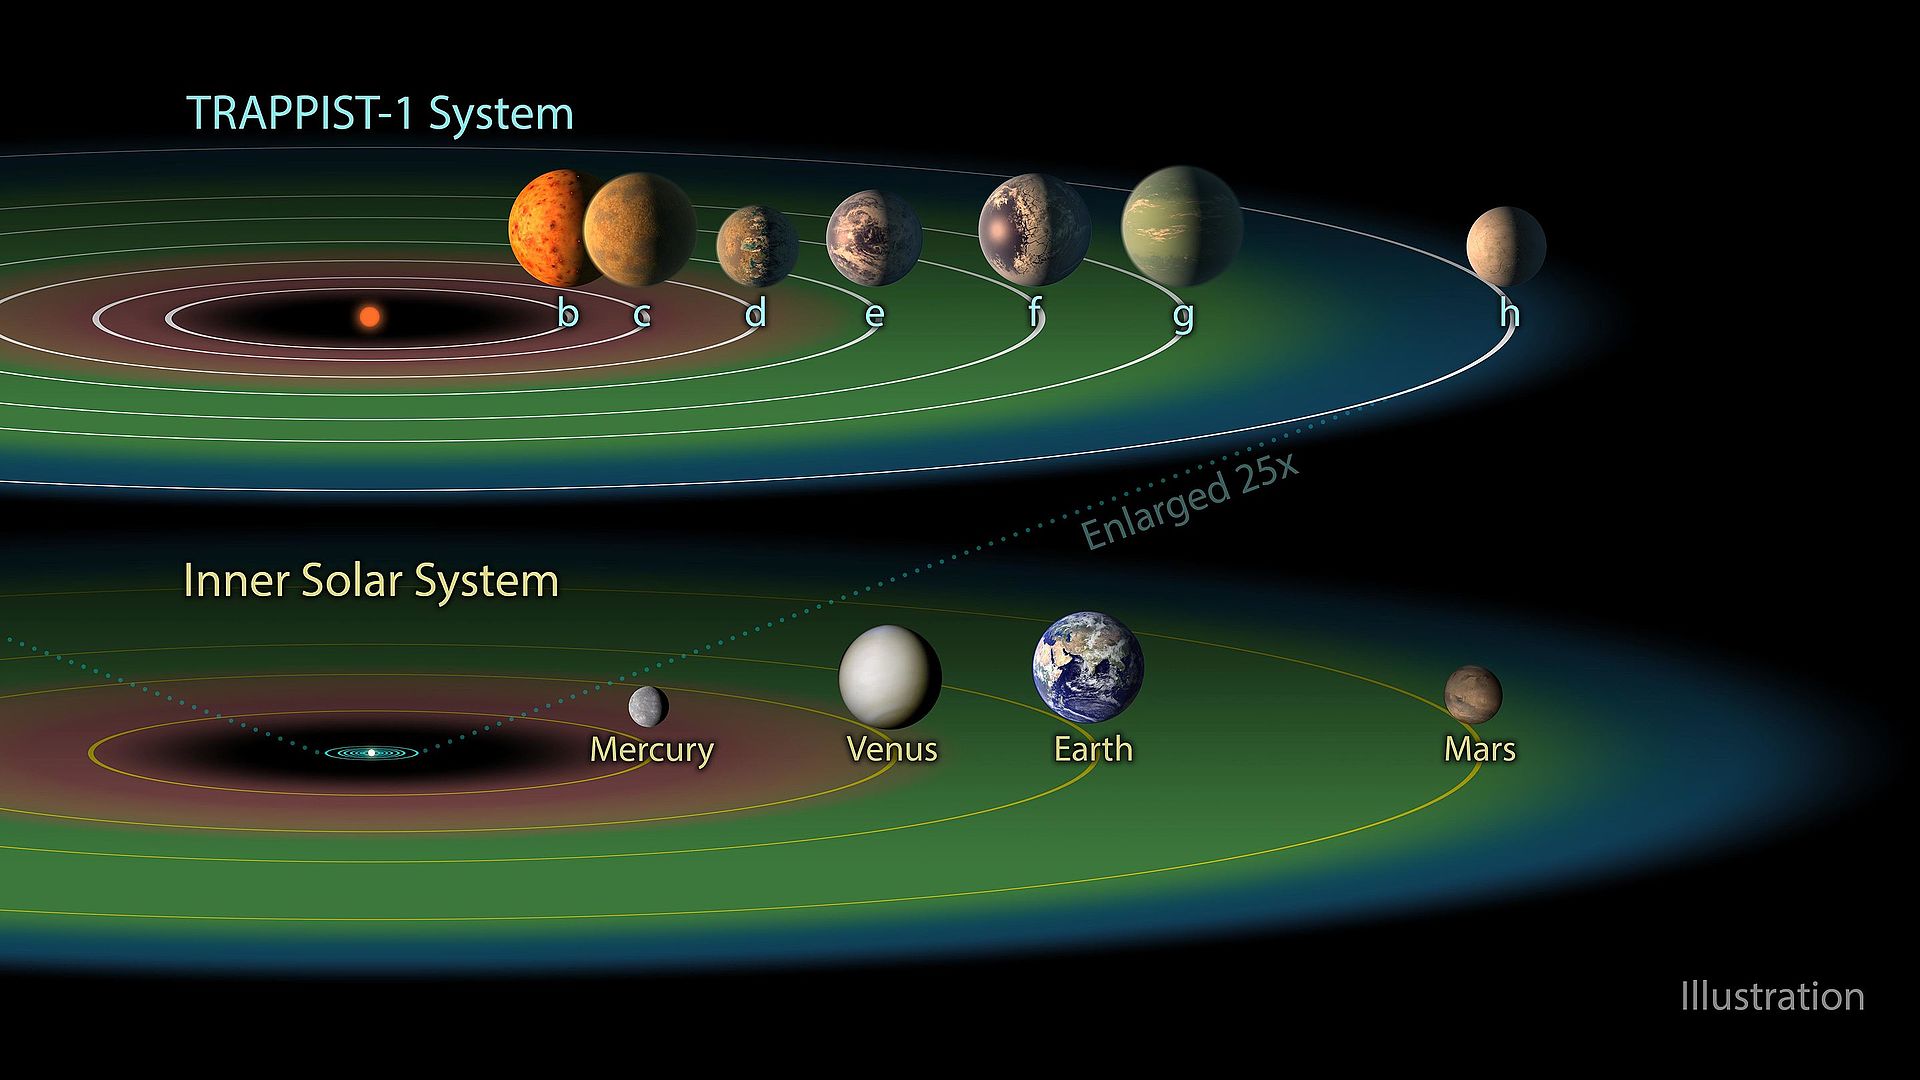 Nom : PIA21424_-_The_TRAPPIST-1_Habitable_Zone.jpg
Affichages : 73
Taille : 157,0 Ko